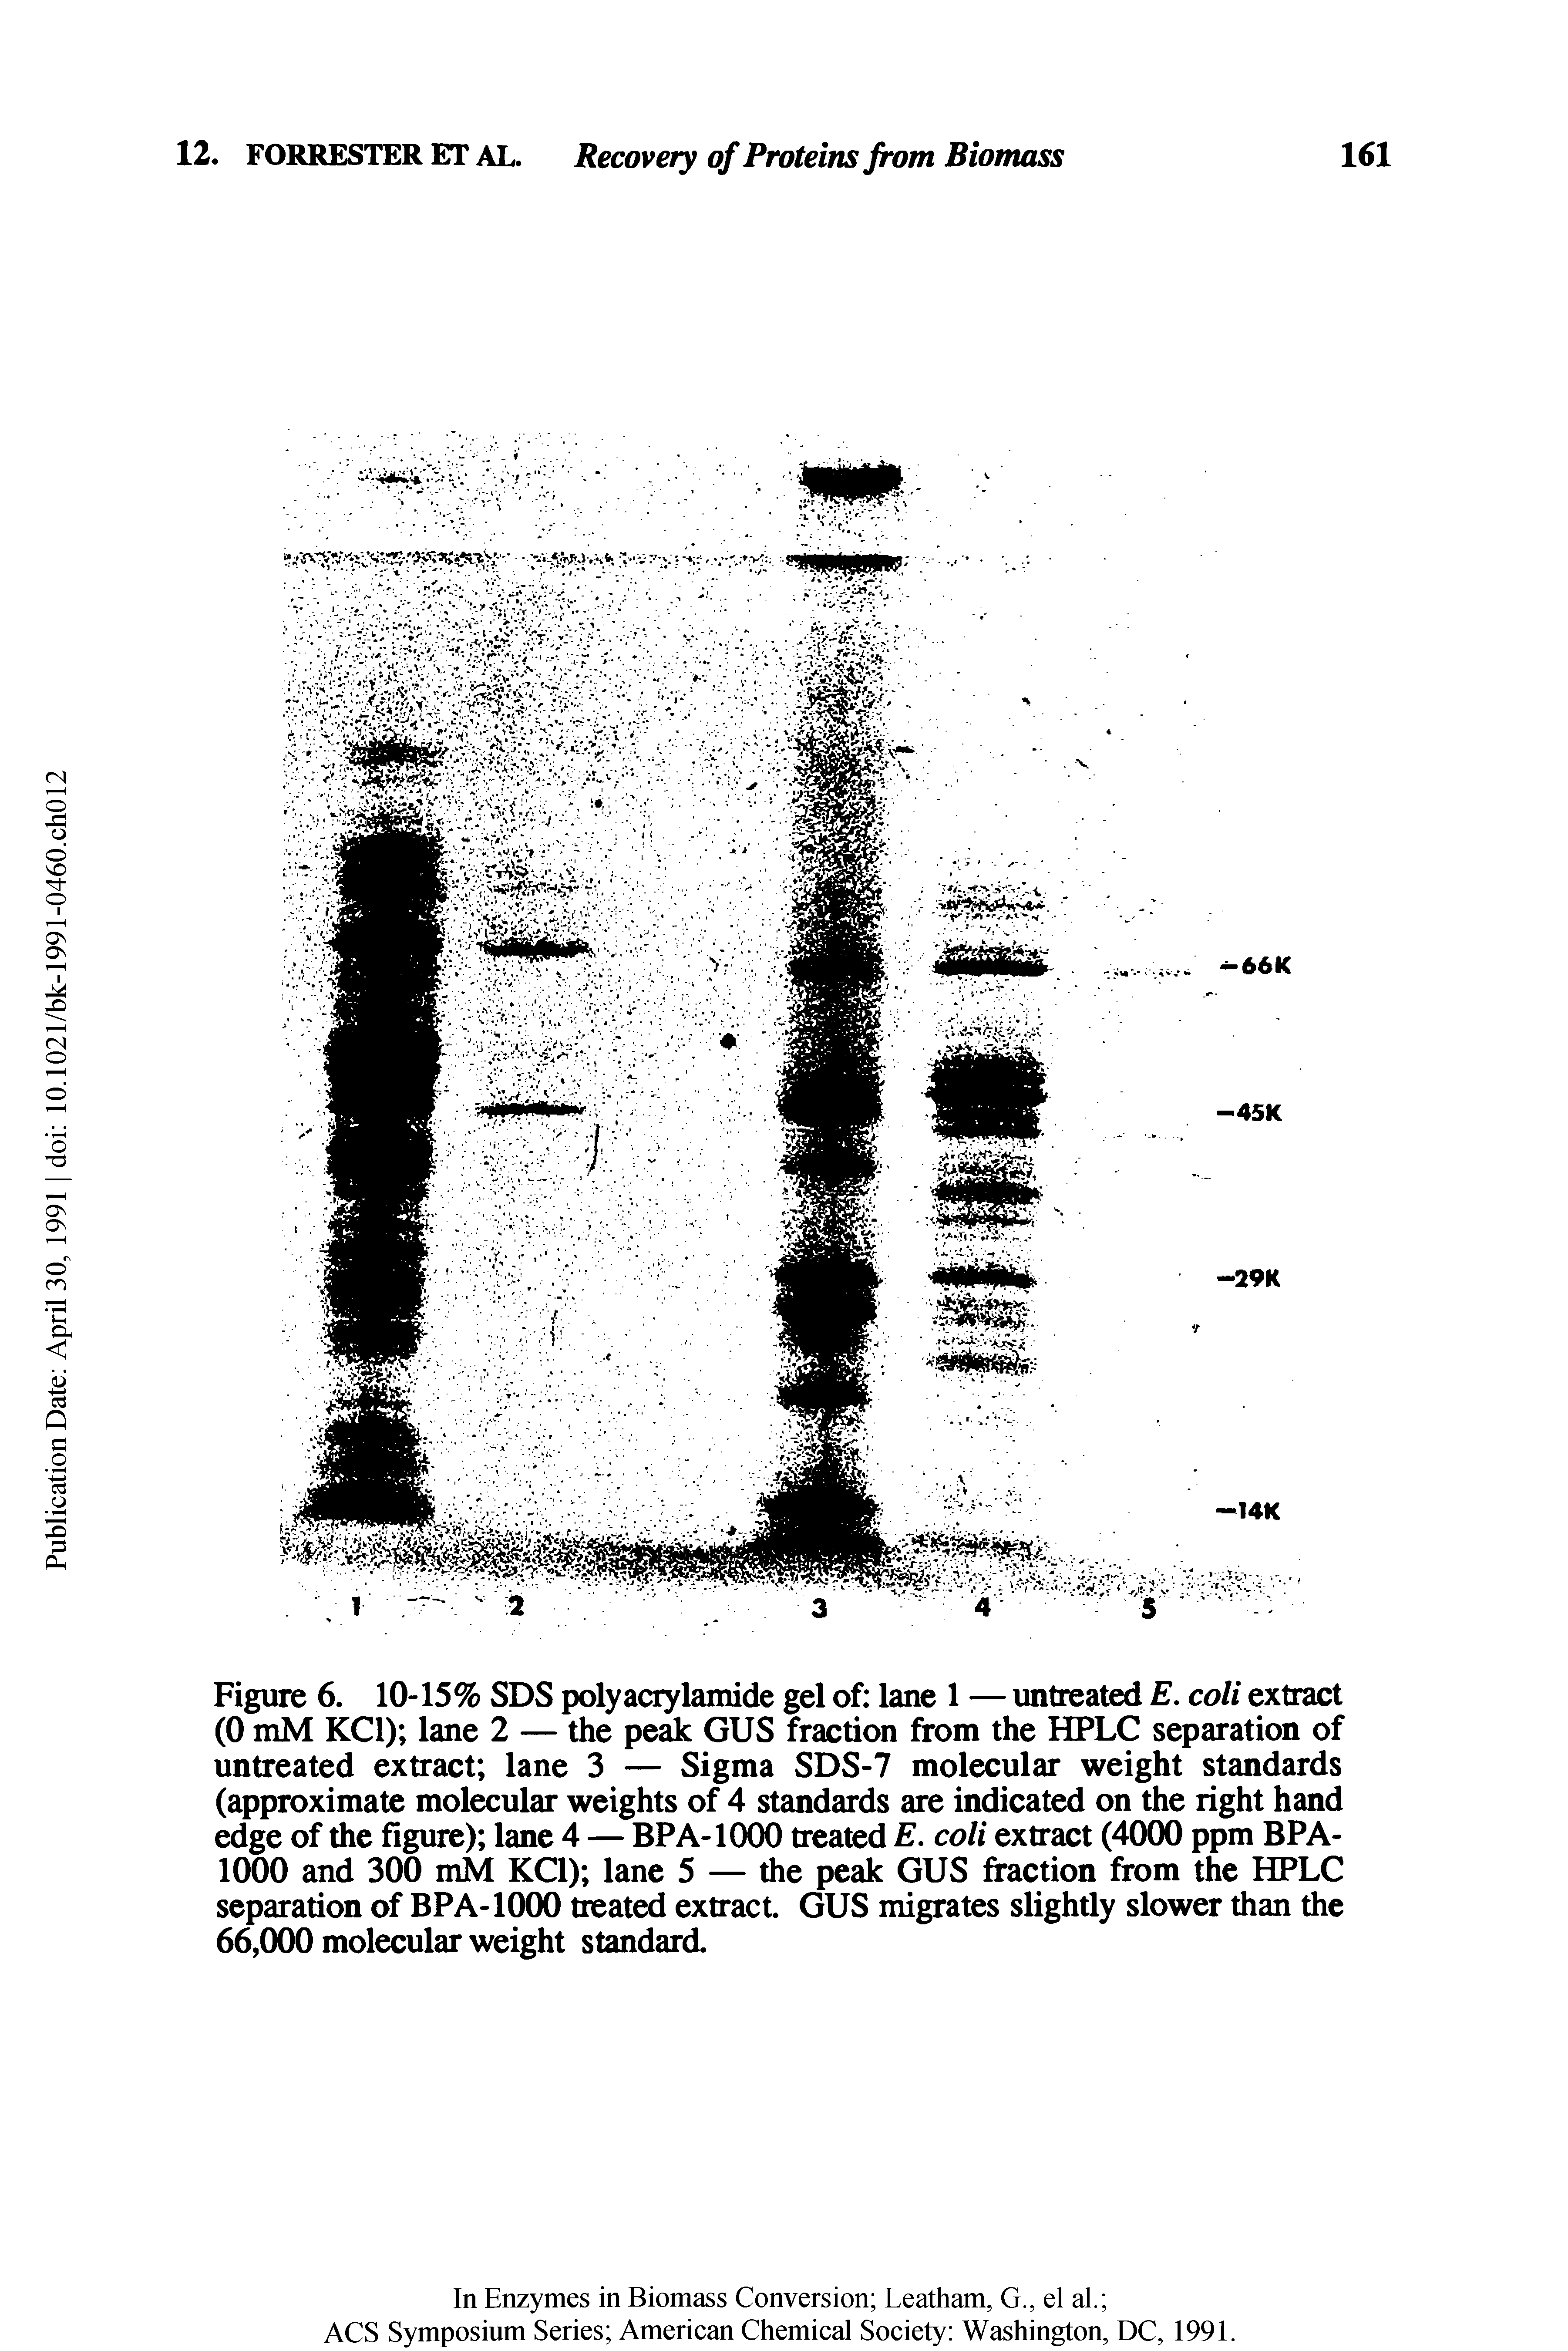 Figure 6. 10-15% SDS polyacrylamide gel of lane 1 — untreated E, coli extract (0 mM KCl) lane 2 — the peak GUS fraction from the HPLC separation of untreated extract lane 3 — Sigma SDS-7 molecular weight standards (approximate molecular weights of 4 standards are indicated on the right hand edge of the figure) lane 4 — BPA-1000 treated E. coli extract (4000 ppm BPA-1000 and 300 mM KCl) lane 5 — the peak GUS fraction from the HPLC separation of BPA-1000 treated extract. GUS migrates slightly slower than the 66,000 molecular weight standard.